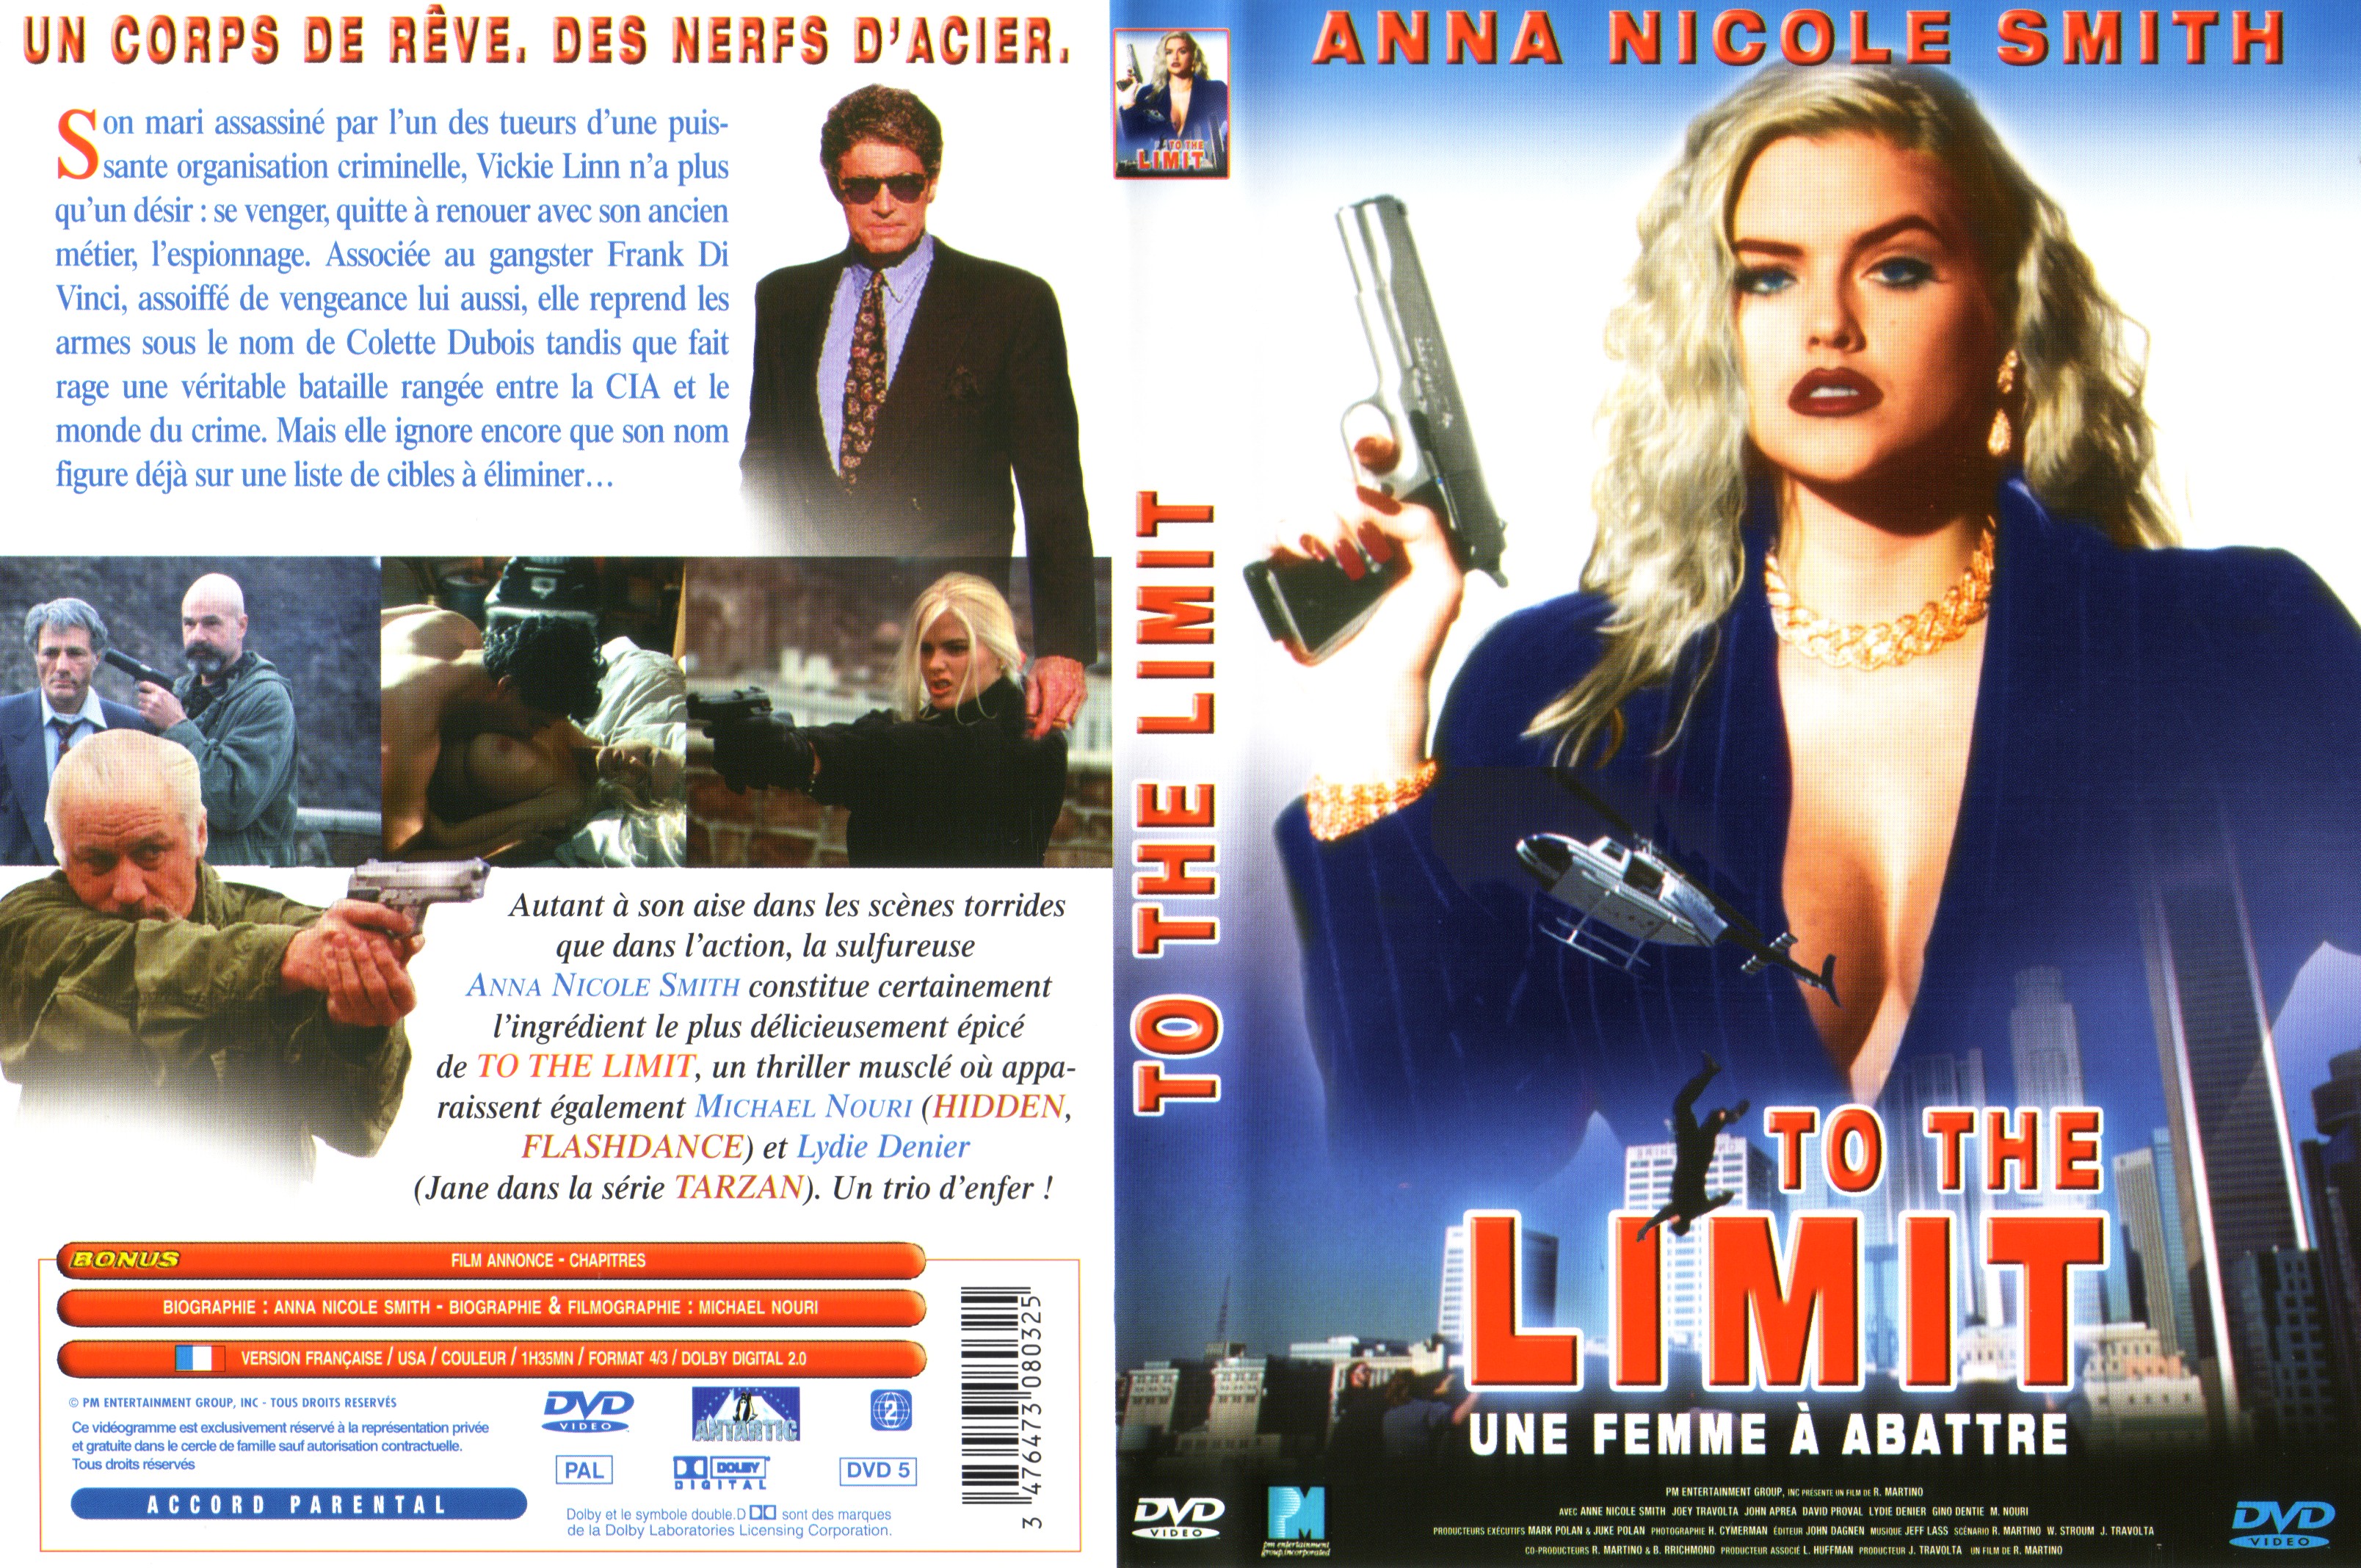 Jaquette DVD To the limit